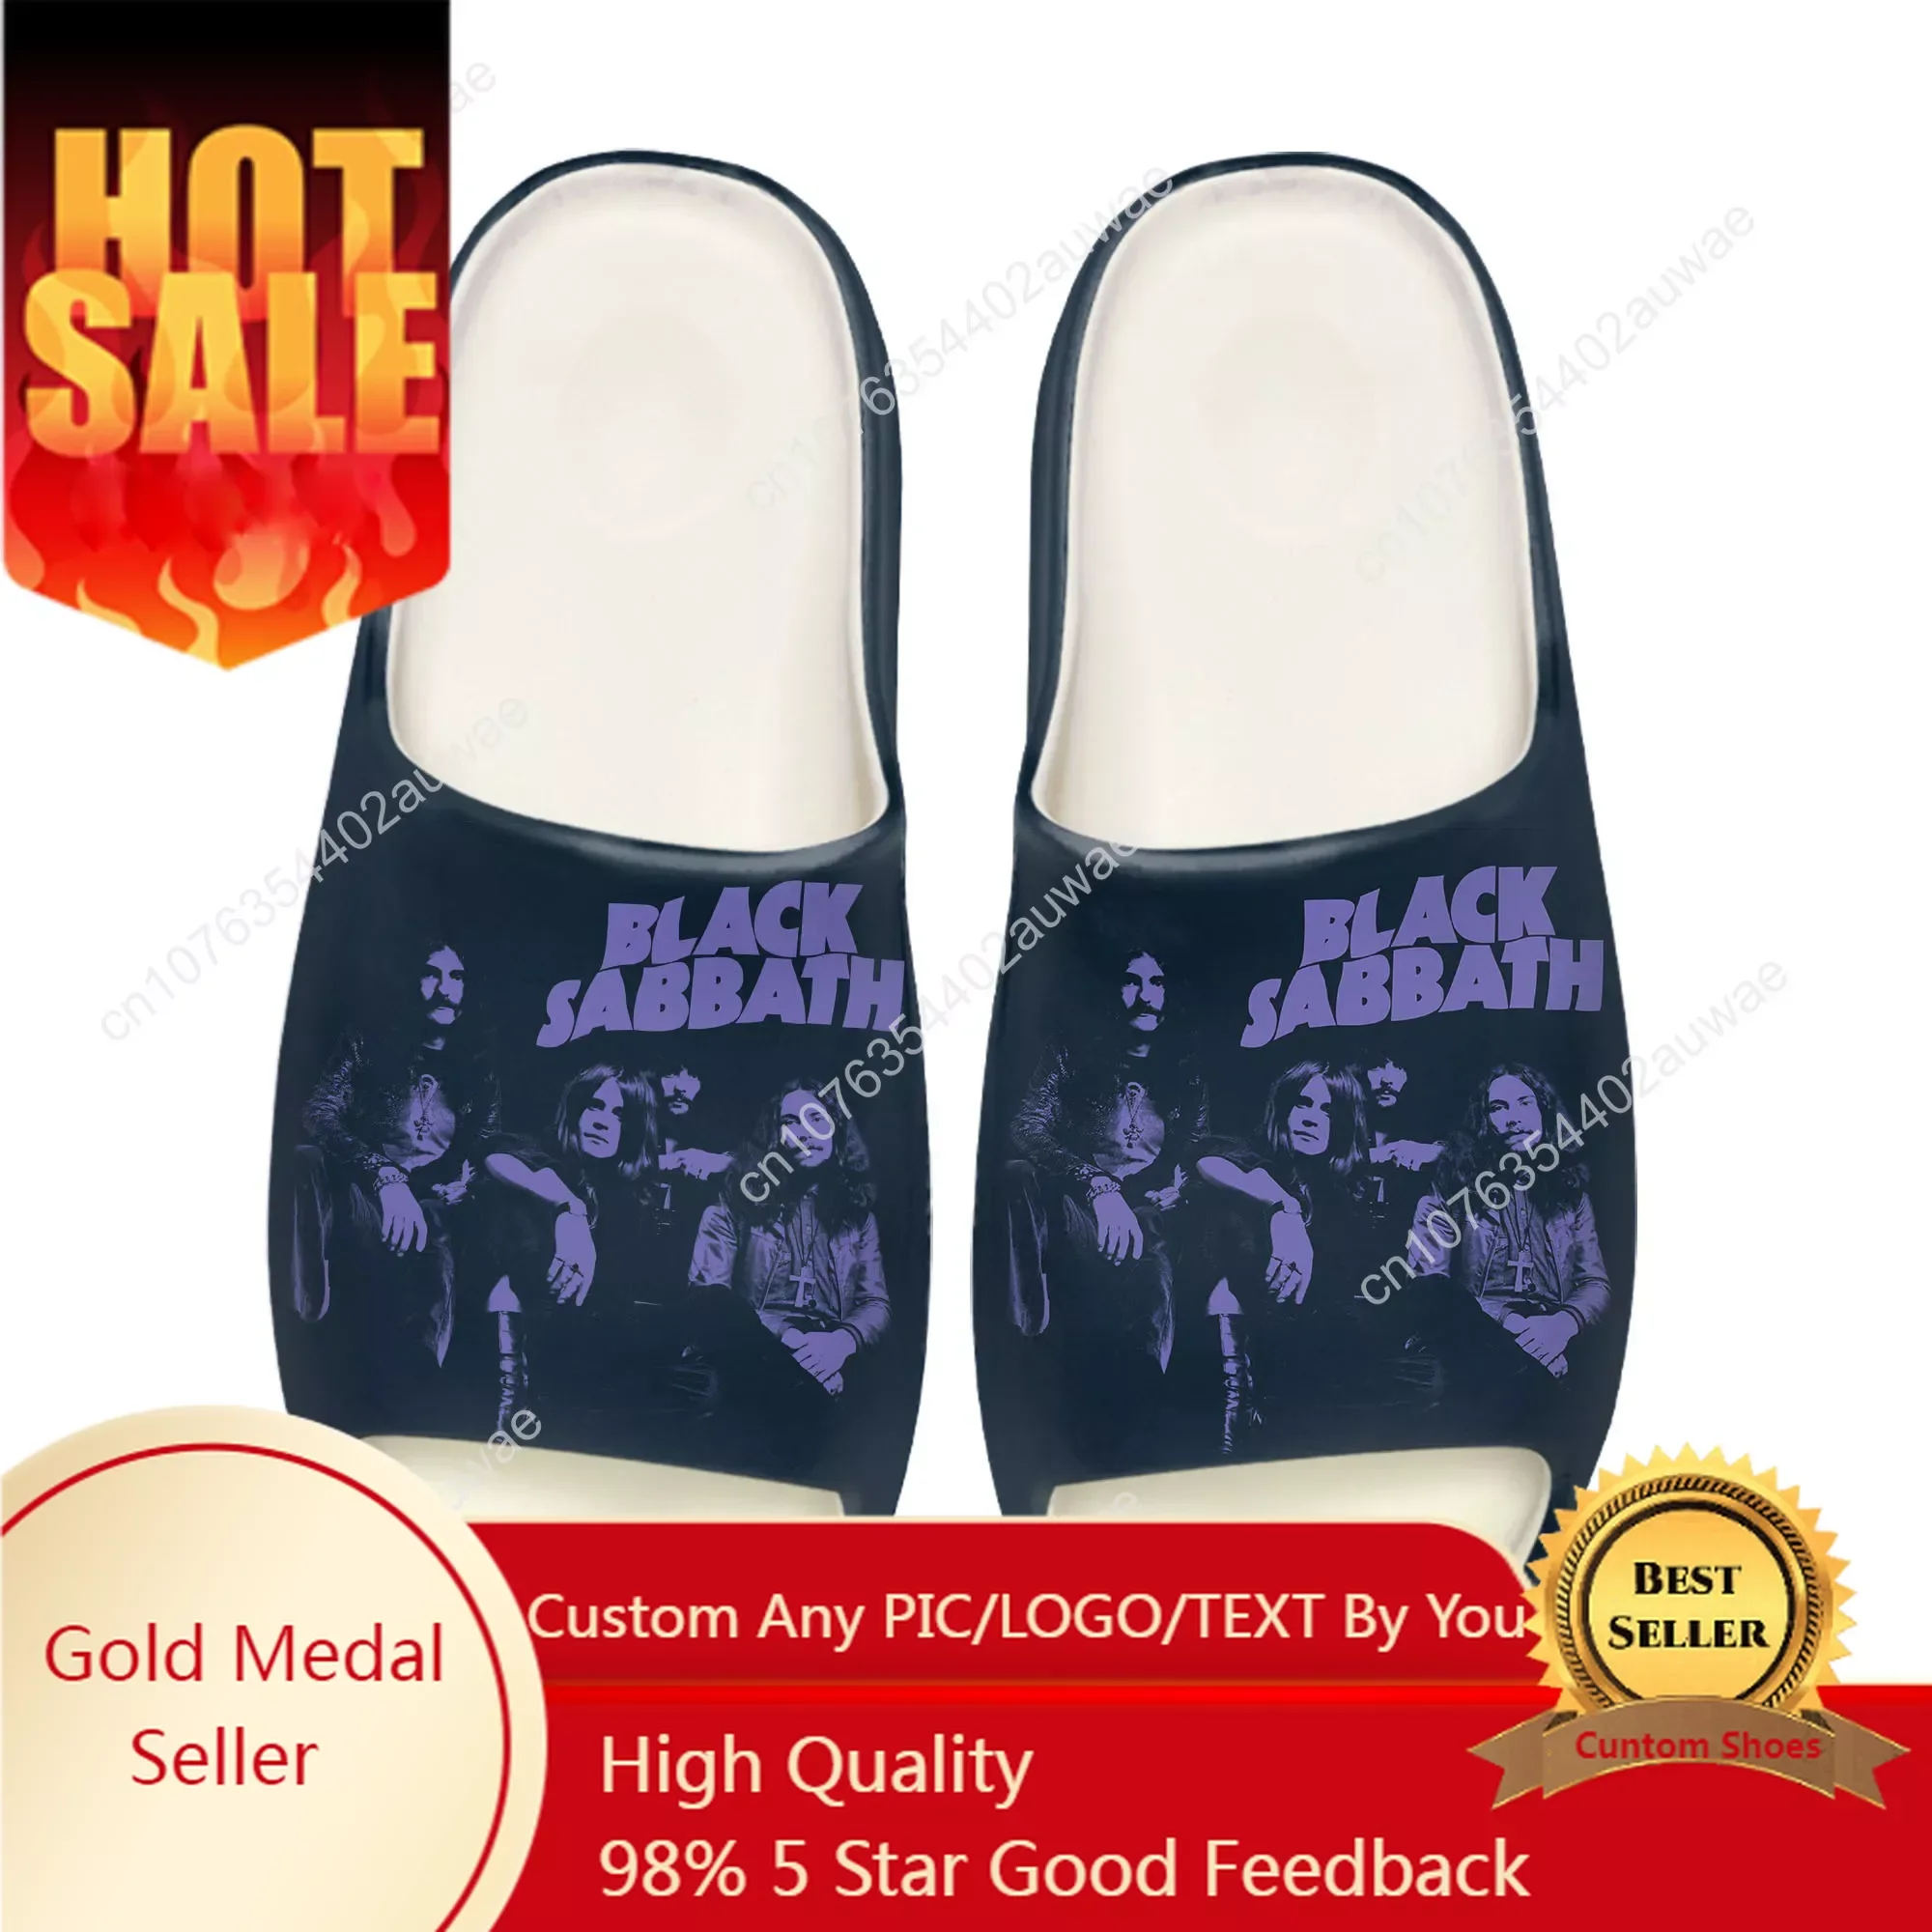 

Black Heavy Metal Band Sabbath Soft Sole Sllipers Home Clogs Step on Water Shoes Mens Womens Teenager Customize on Shit Sandals